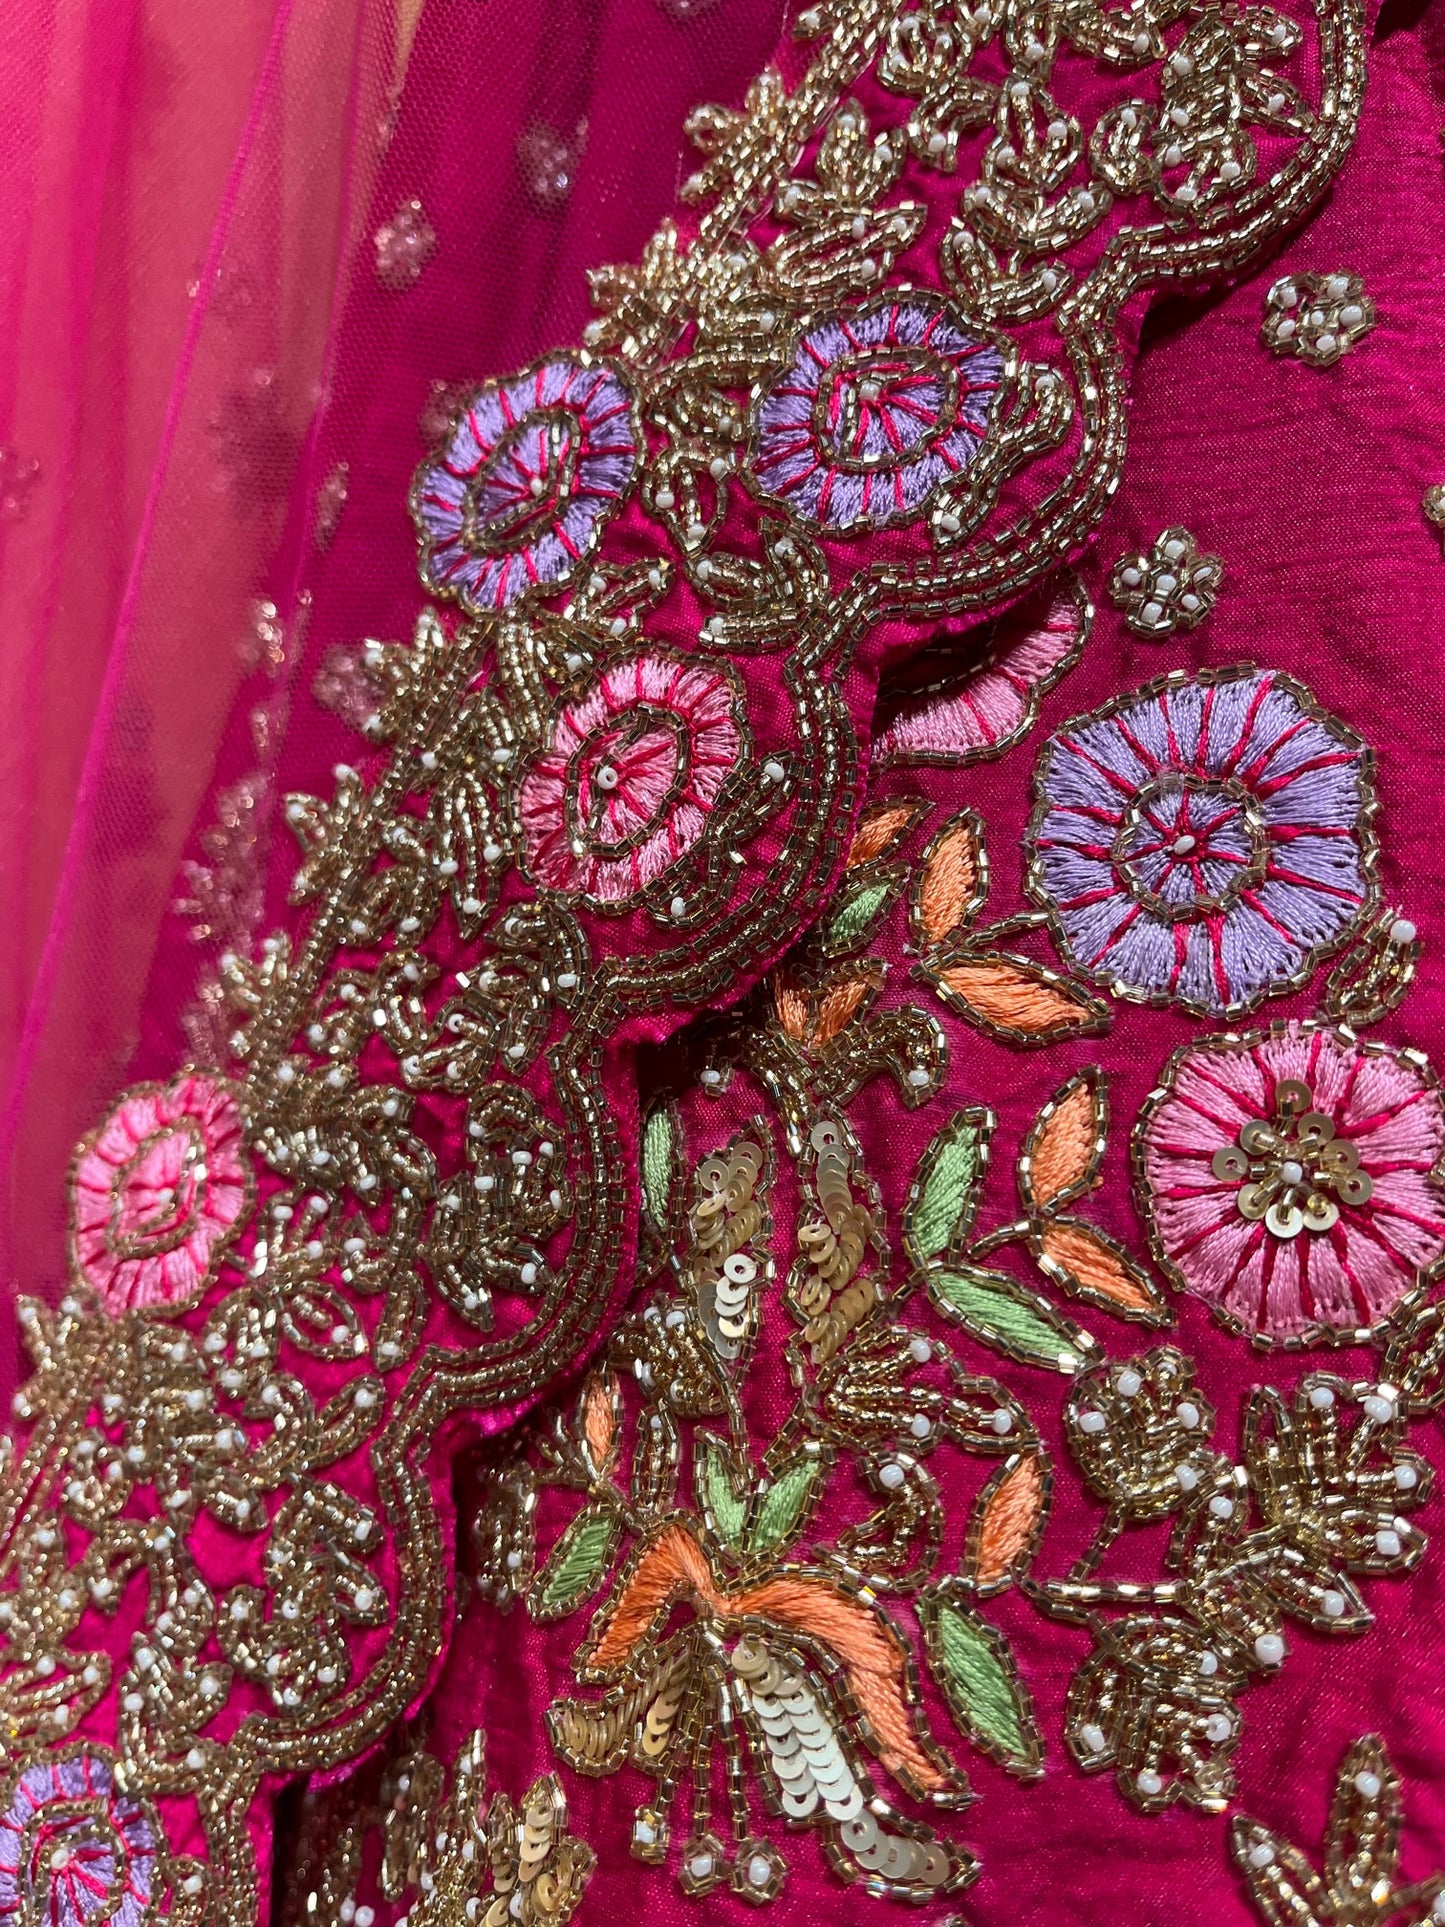 RANI PINK COLOUR SILK HAND EMBROIDERED BRIDAL LEHENGA EMBELLISHED WITH CUTDANA & SEQUINS WORK